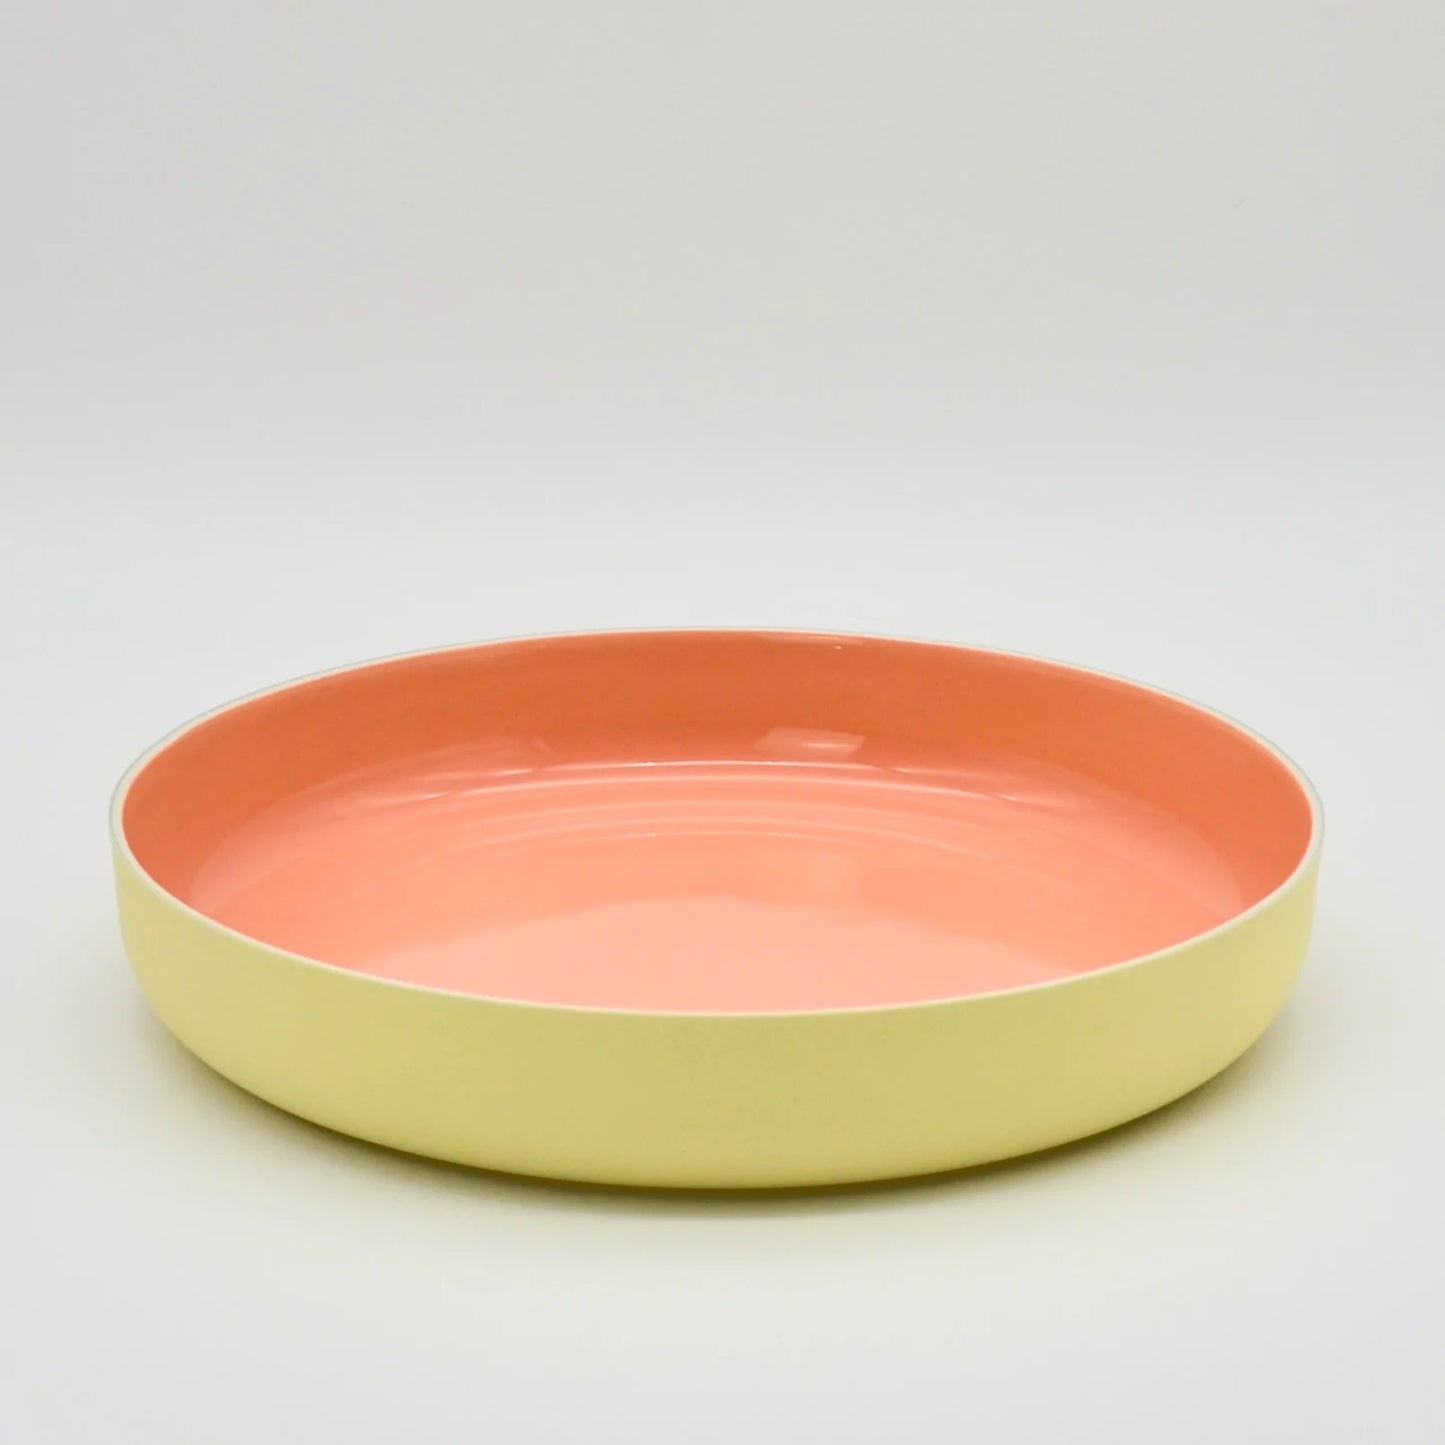 Serving Plate in Yellow